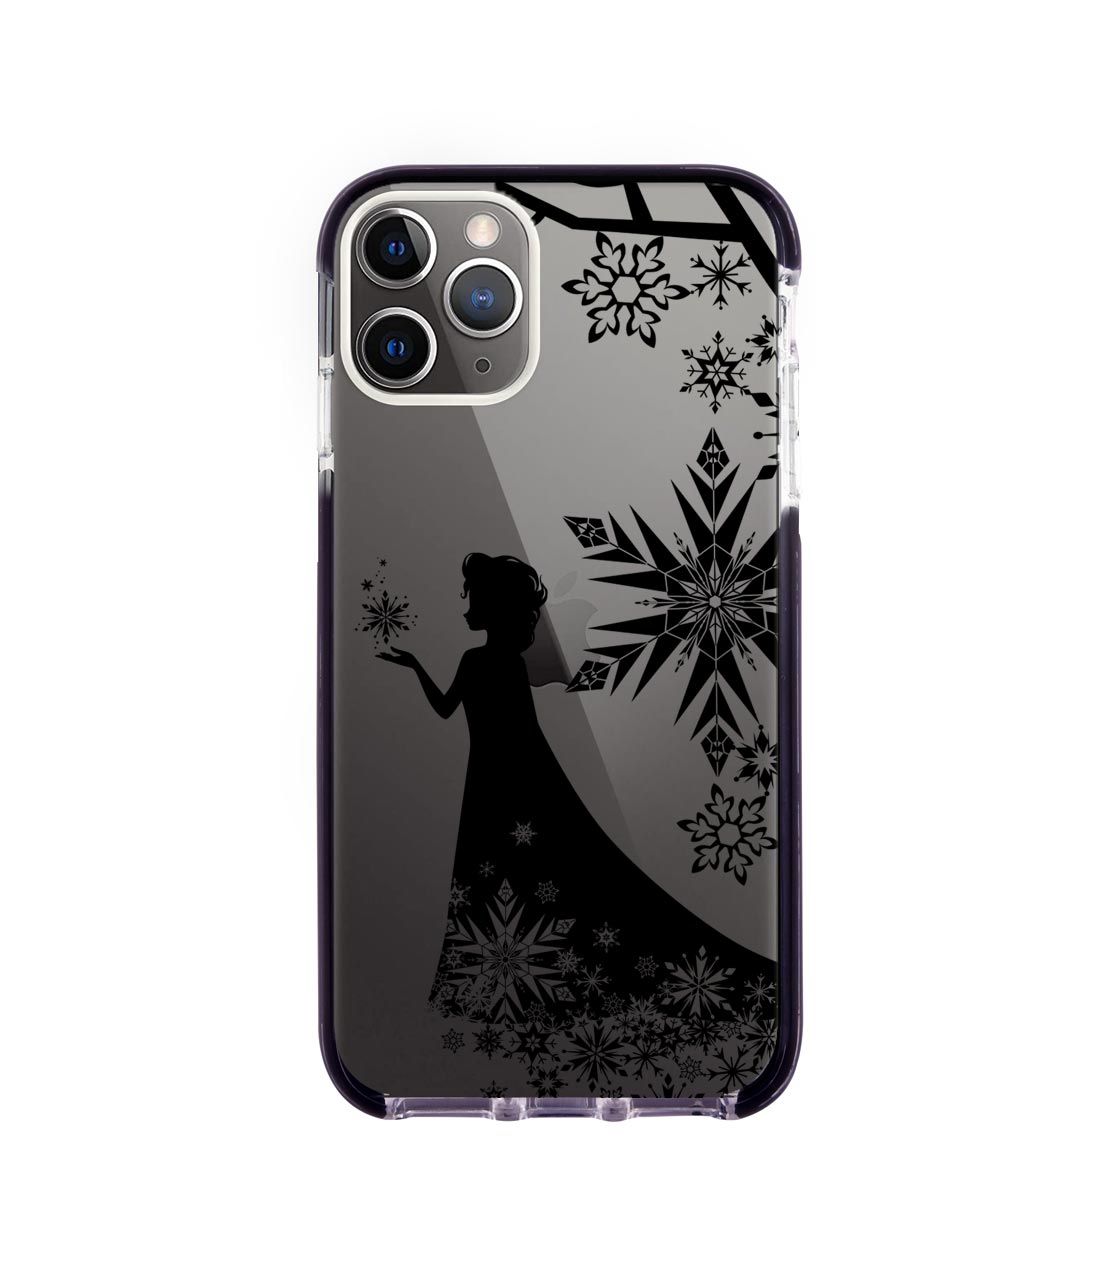 Elsa Silhouette - Extreme Phone Case for iPhone 11 Pro